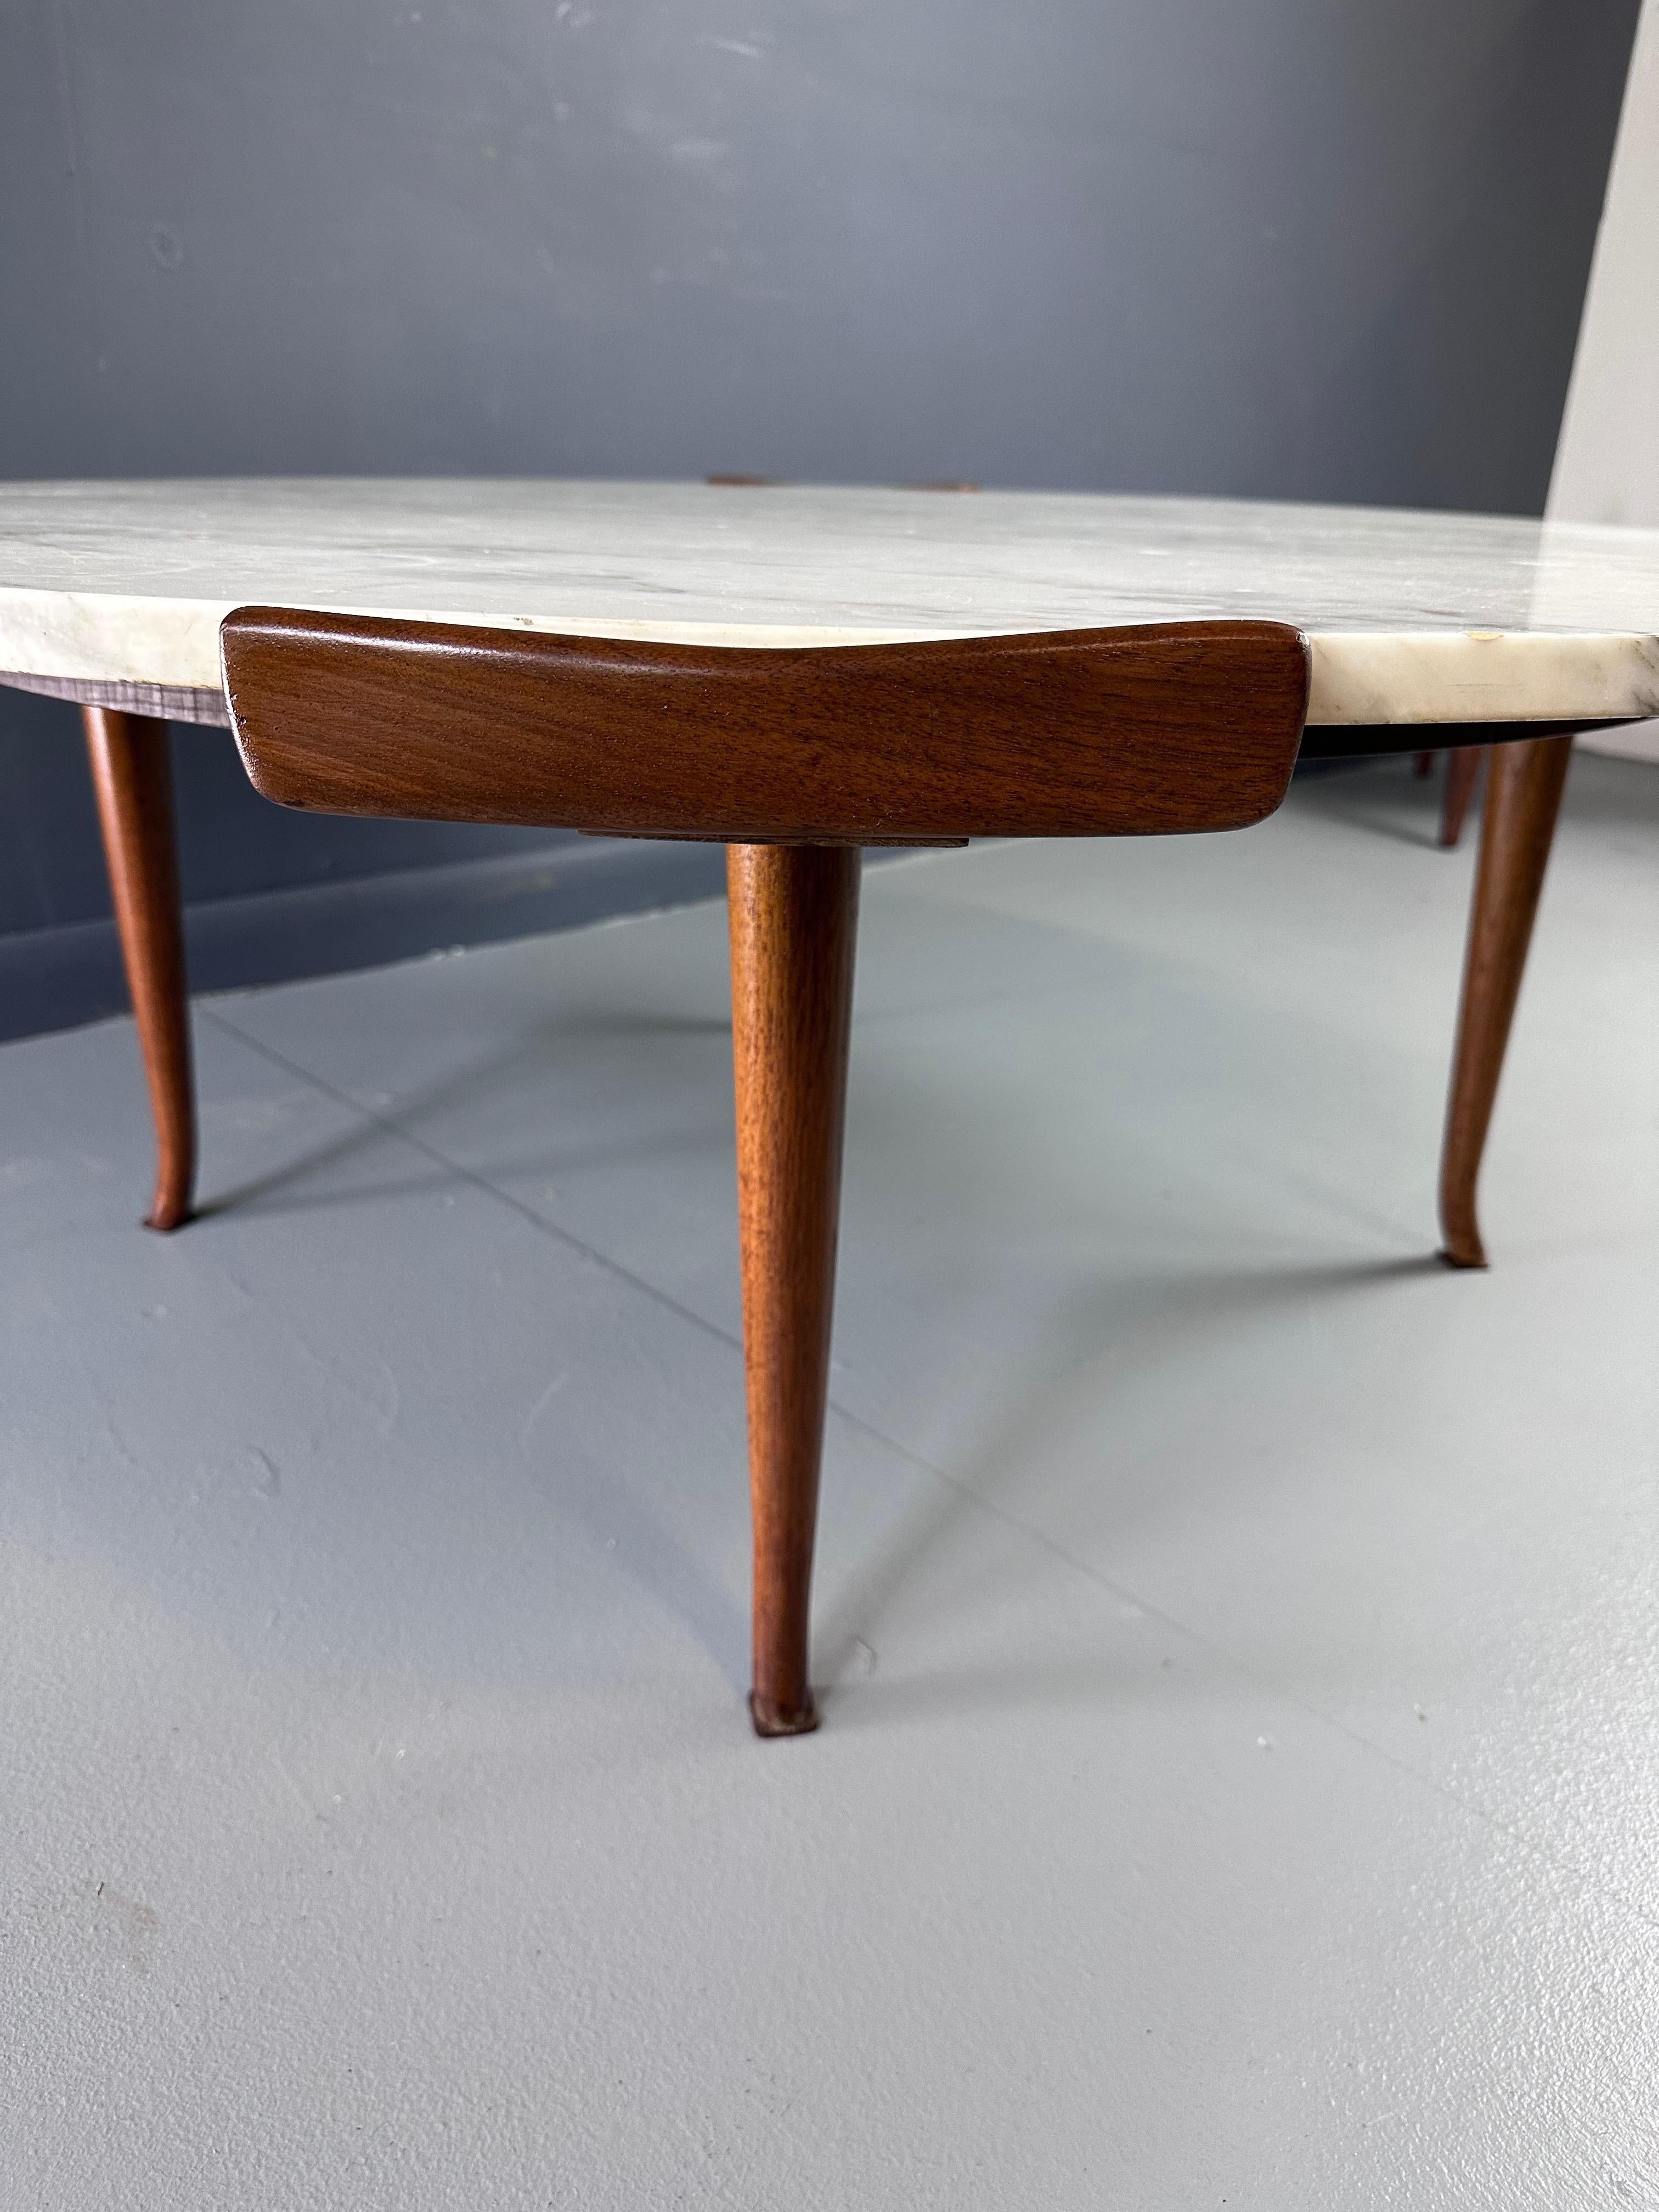 Erno Fabry Coffee Table in Carrara Marble and a Walnut Base with Curvacrous Legs In Good Condition For Sale In Philadelphia, PA